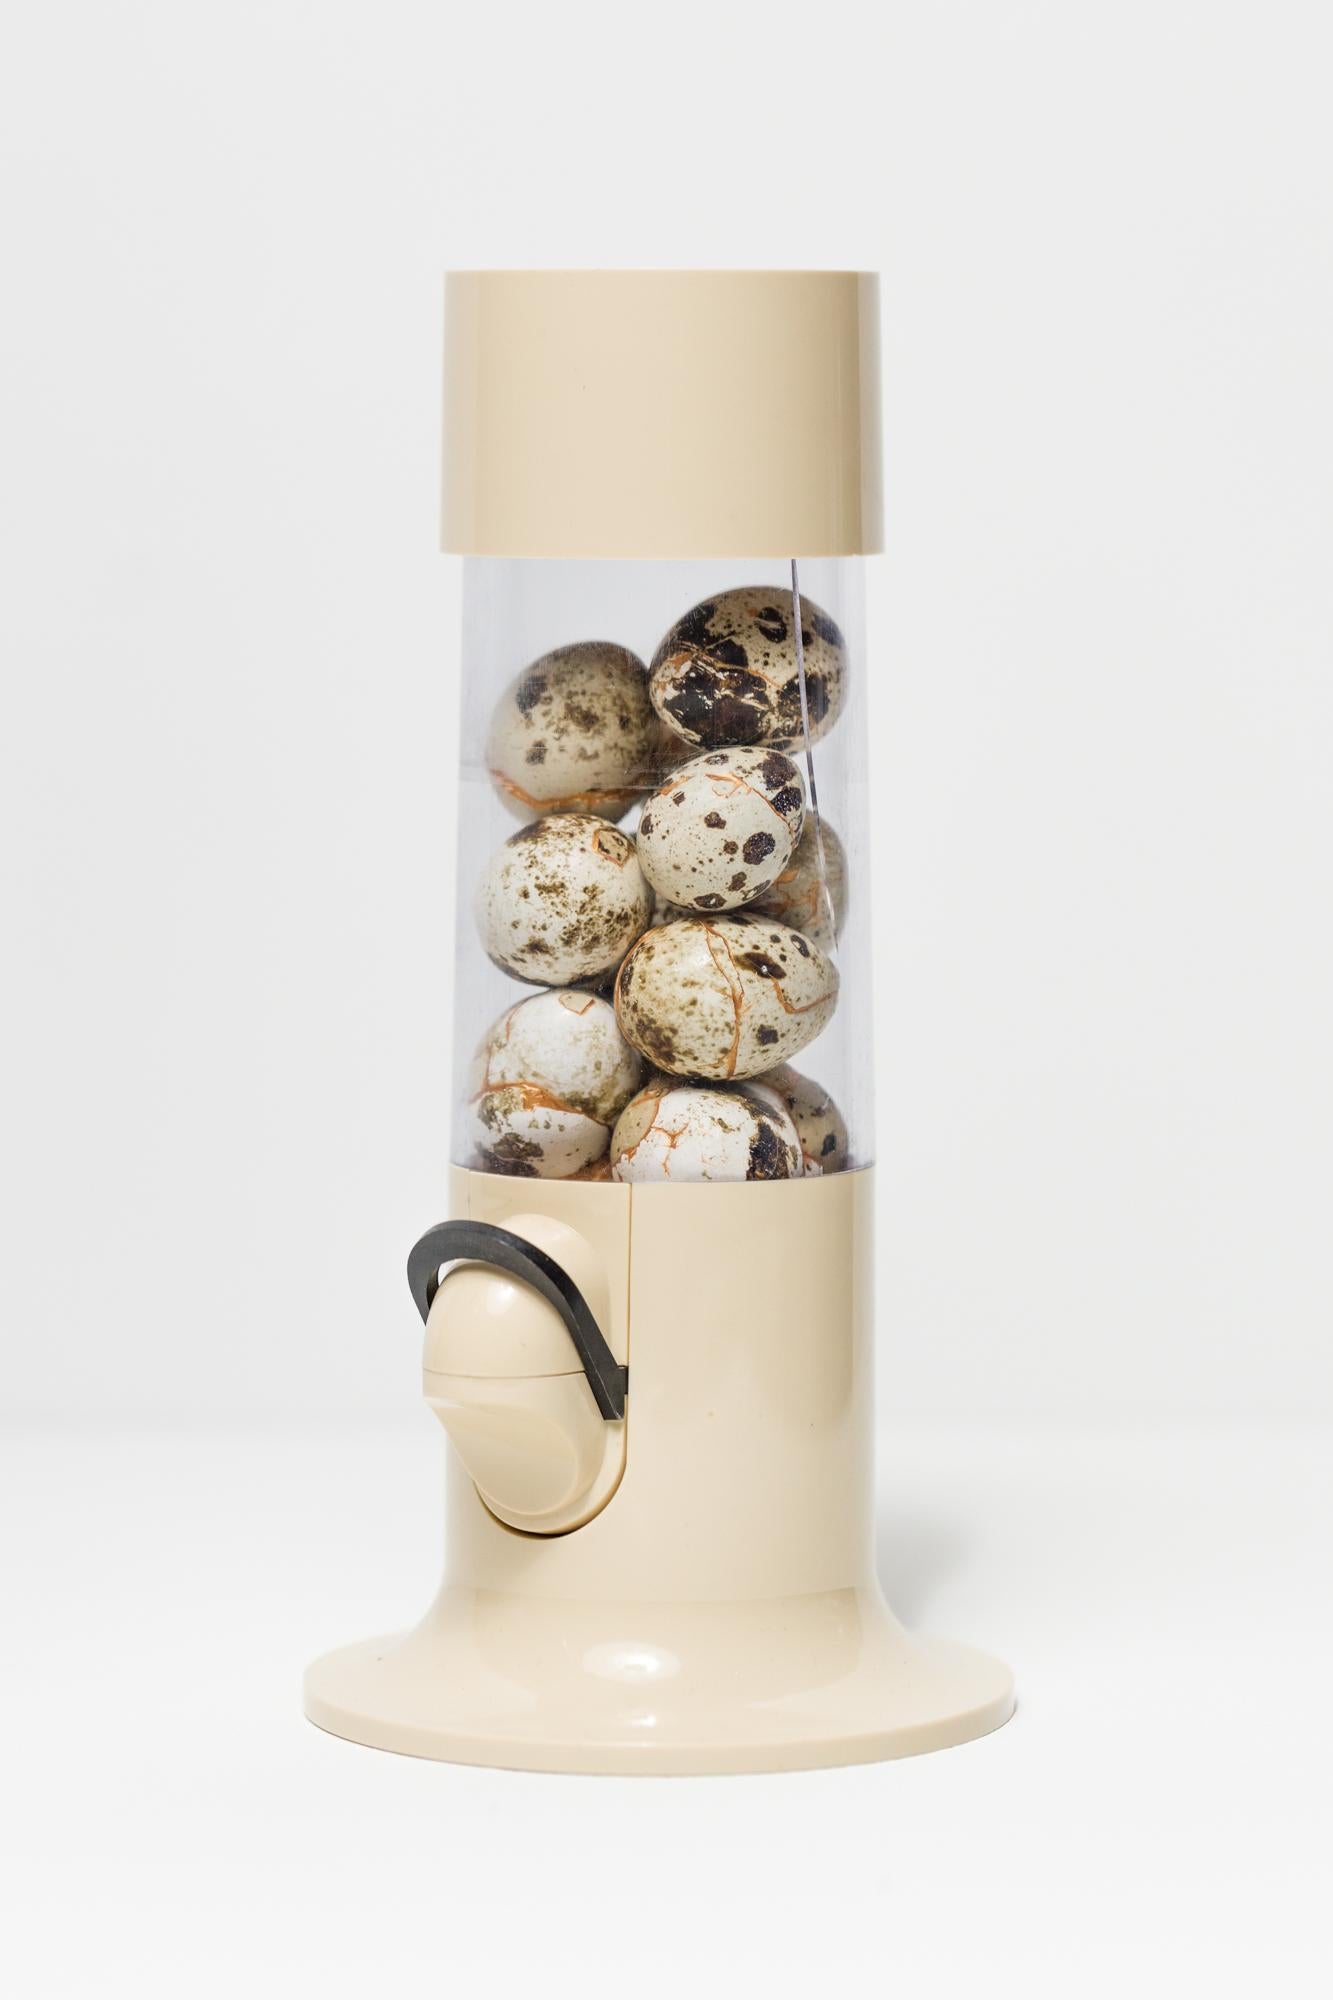 Katie VanVliet Still-Life Sculpture - "Candy Everybody Wants", Found object assemblage, Reconstructed eggs